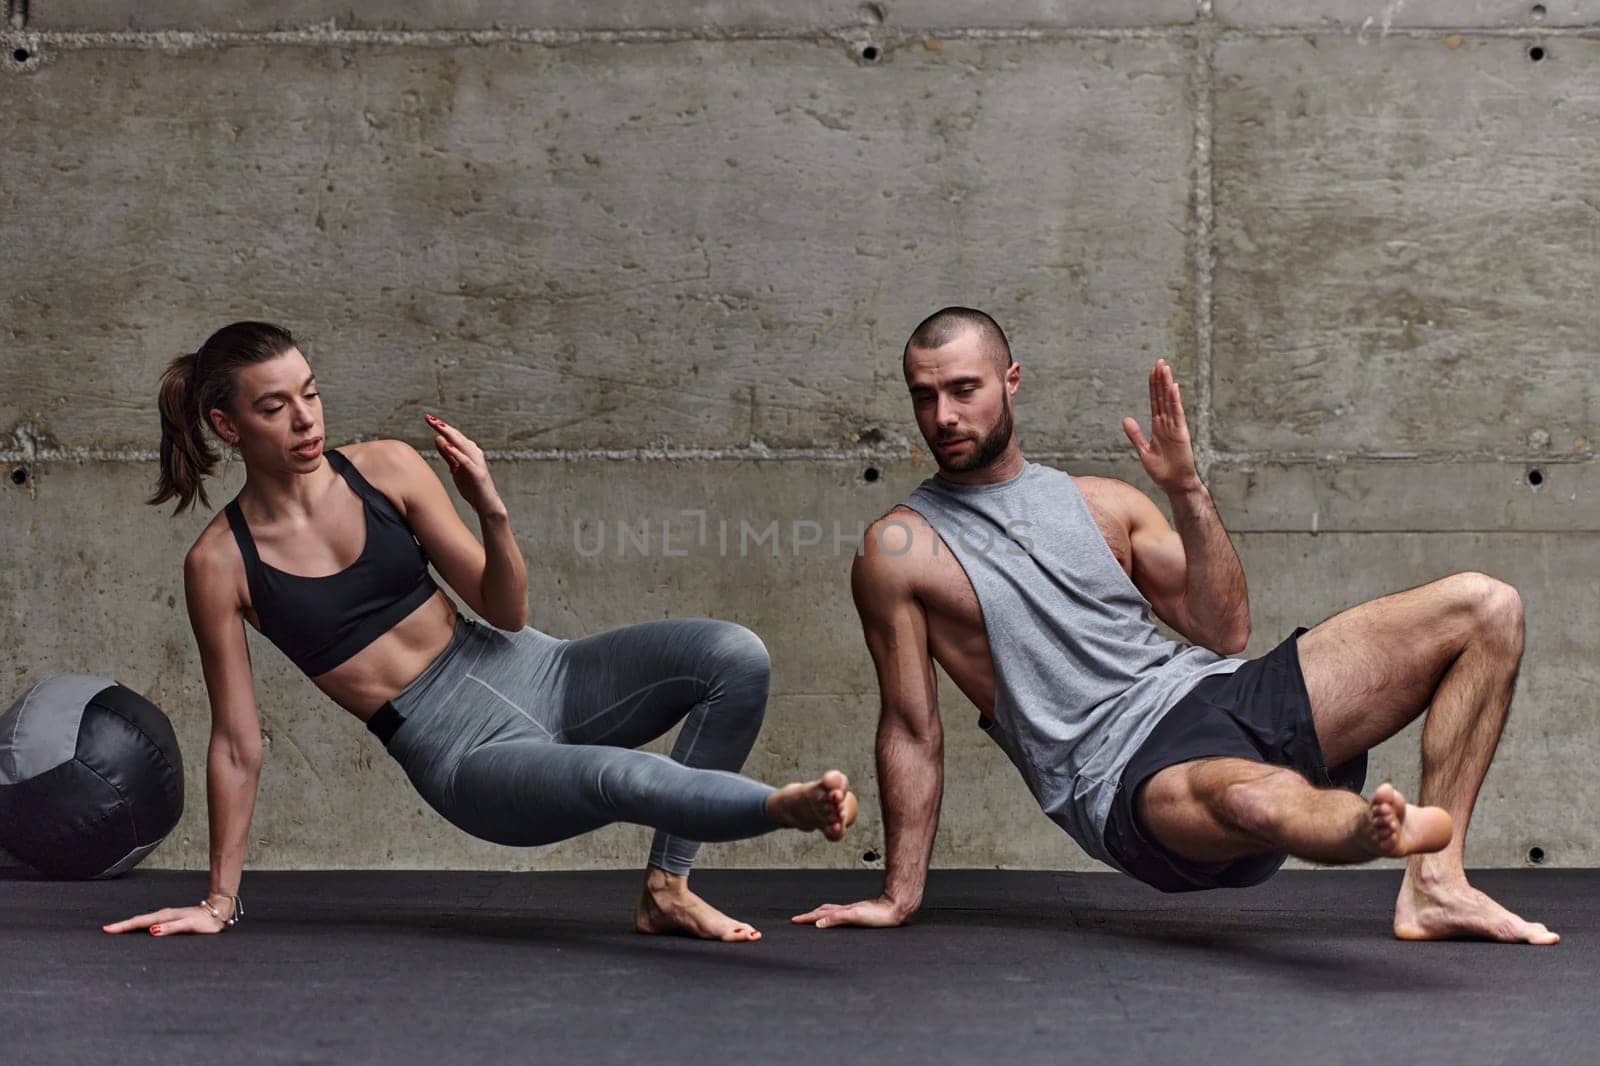 An attractive couple in the gym engaging in various stretching exercises together, showcasing their dedication to fitness, flexibility, and overall wellbeing. With synchronized movements, they demonstrate coordination, balance, and endurance while supporting and motivating each other on their fitness journey.